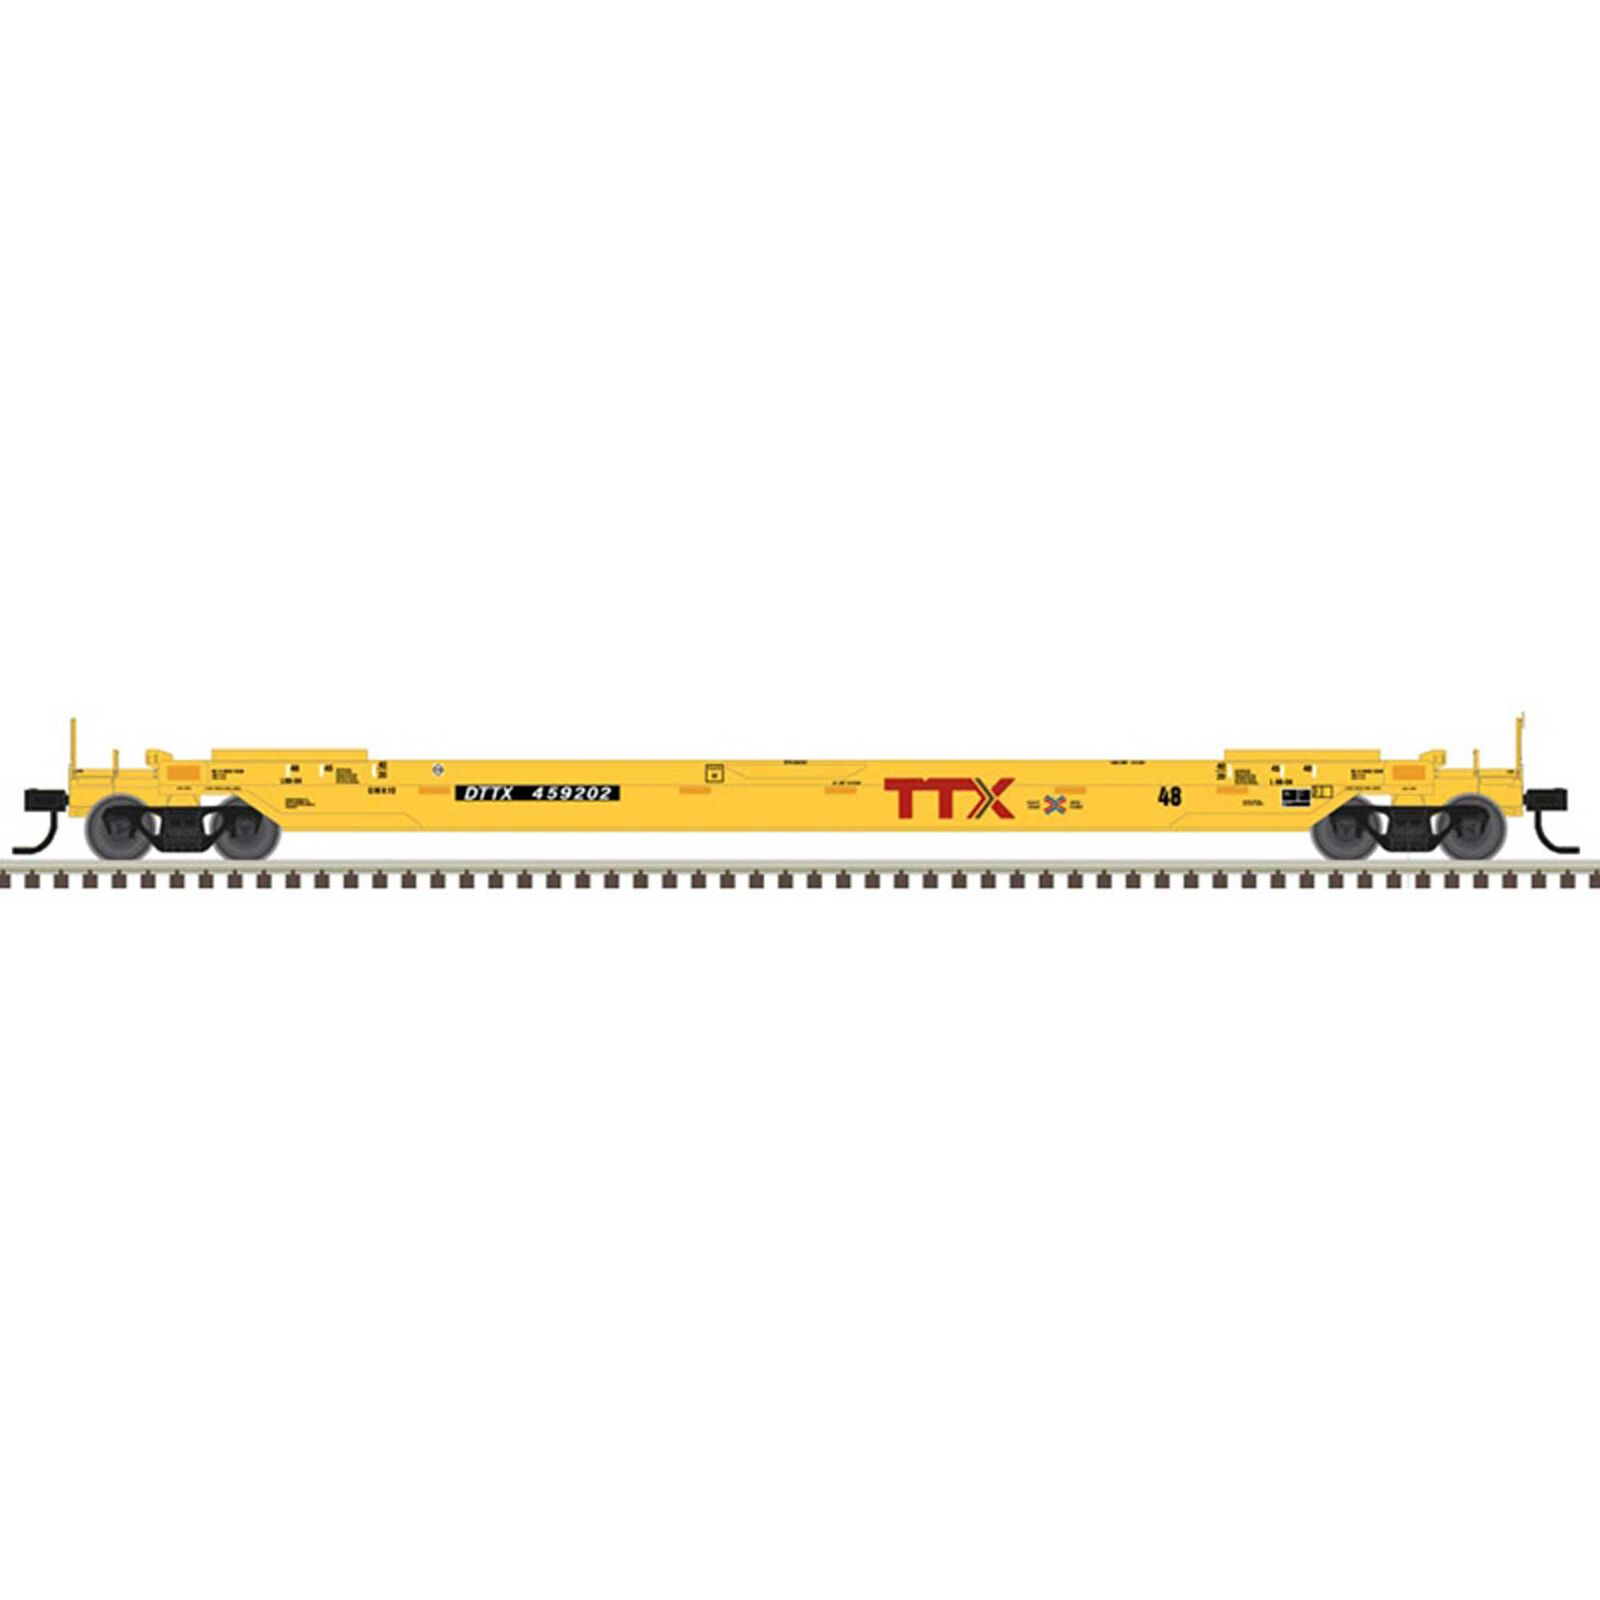 HO 48' Well Car TTX next load any road #456301, Yellow/Black/White